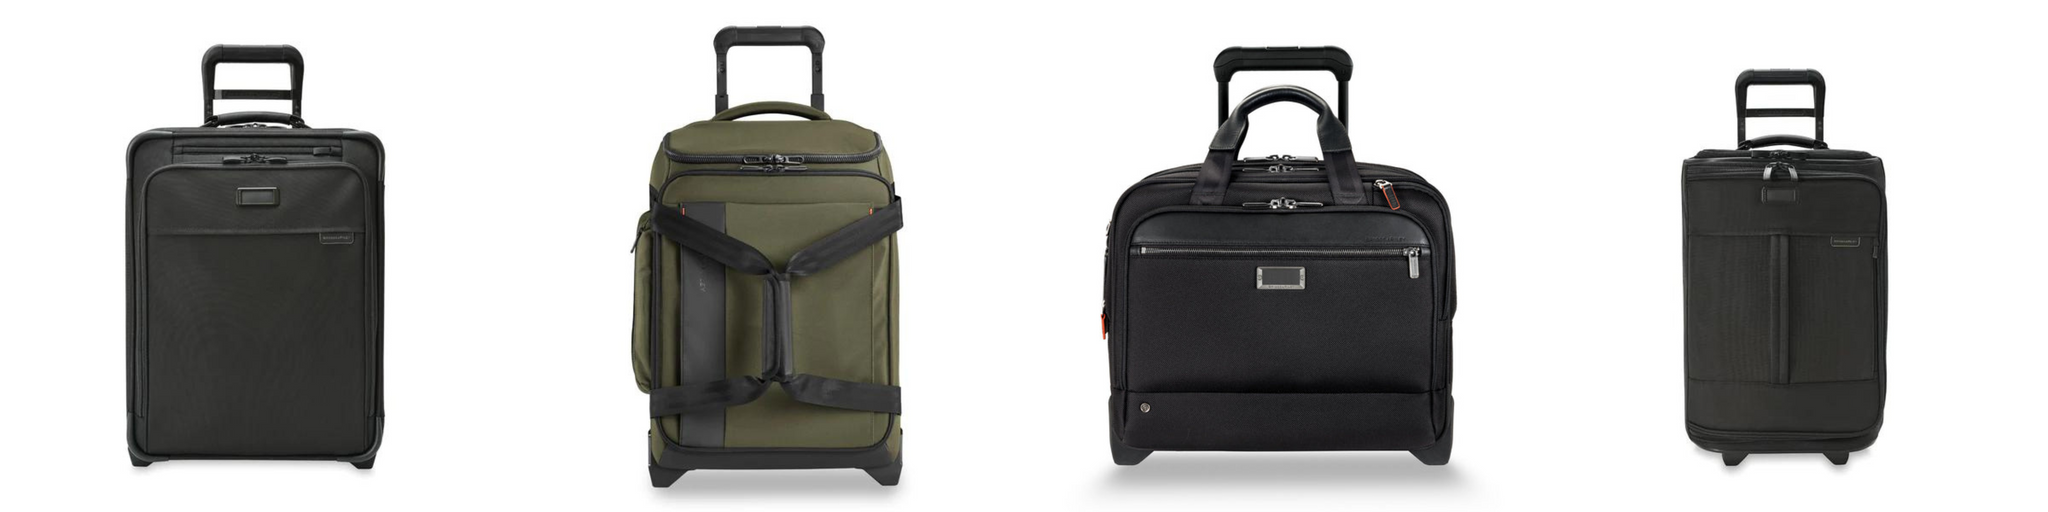 multiple pieces of upright two-wheel luggage